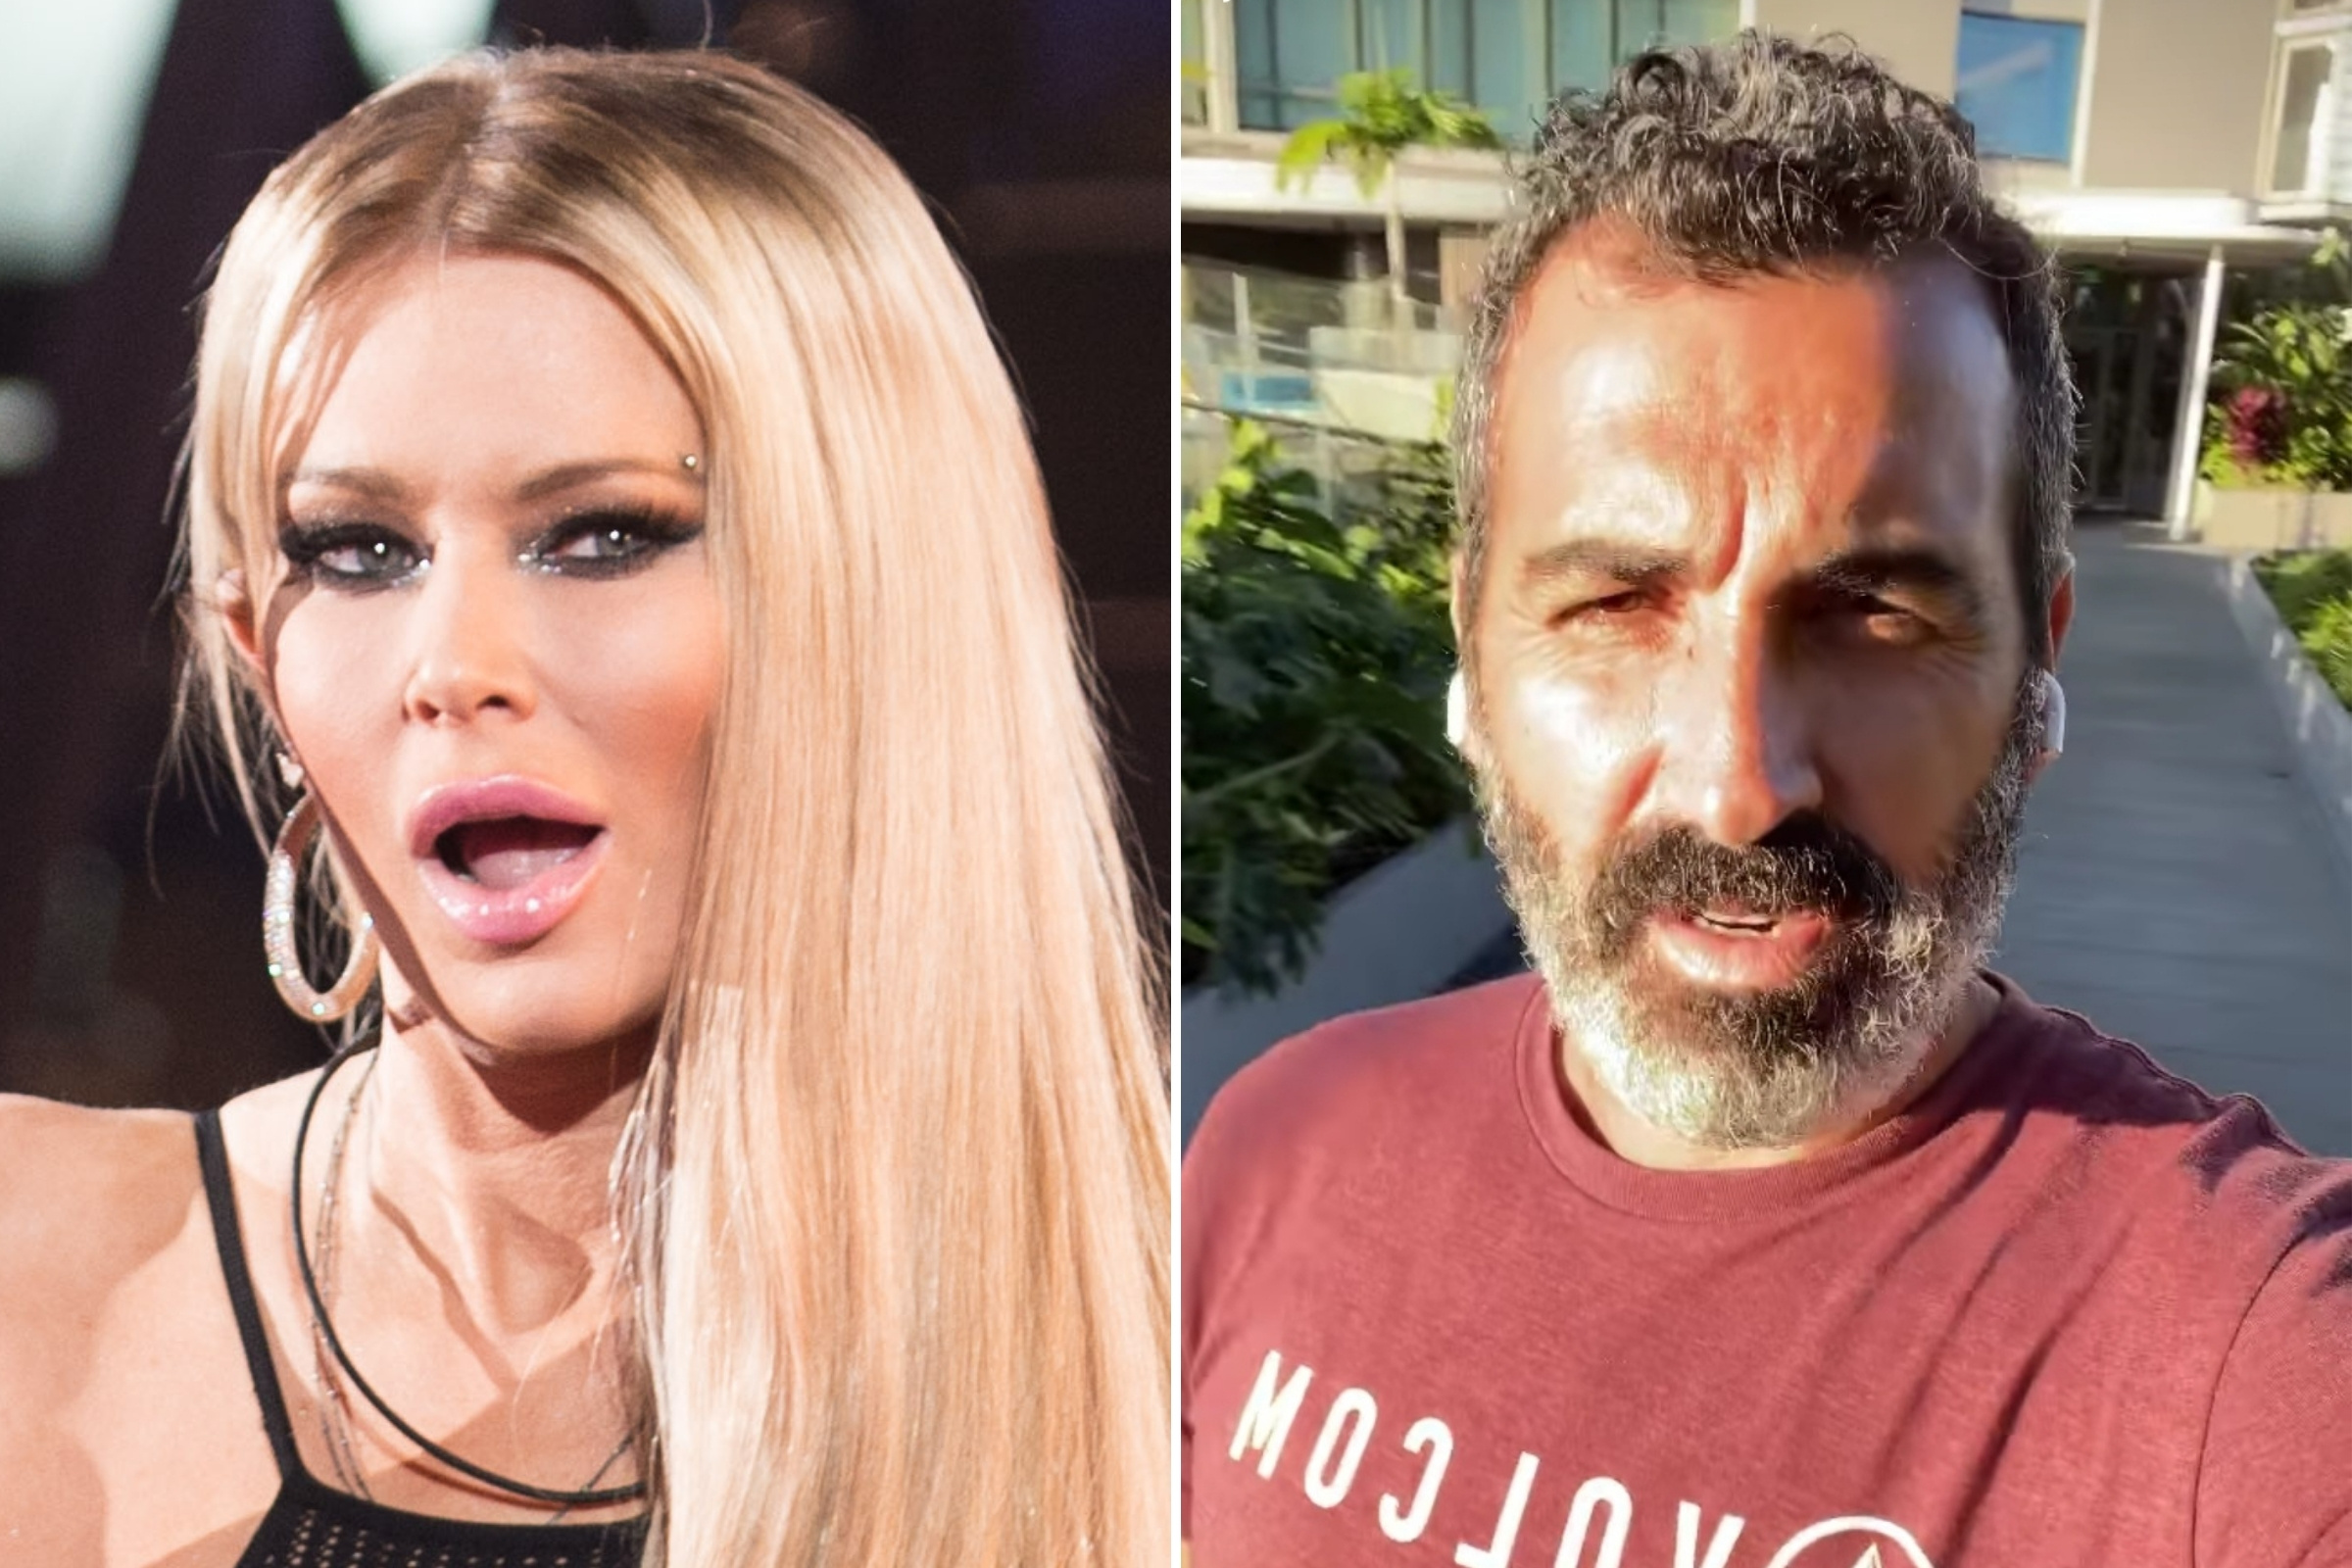 annie tackett recommends jenna jameson two guys pic